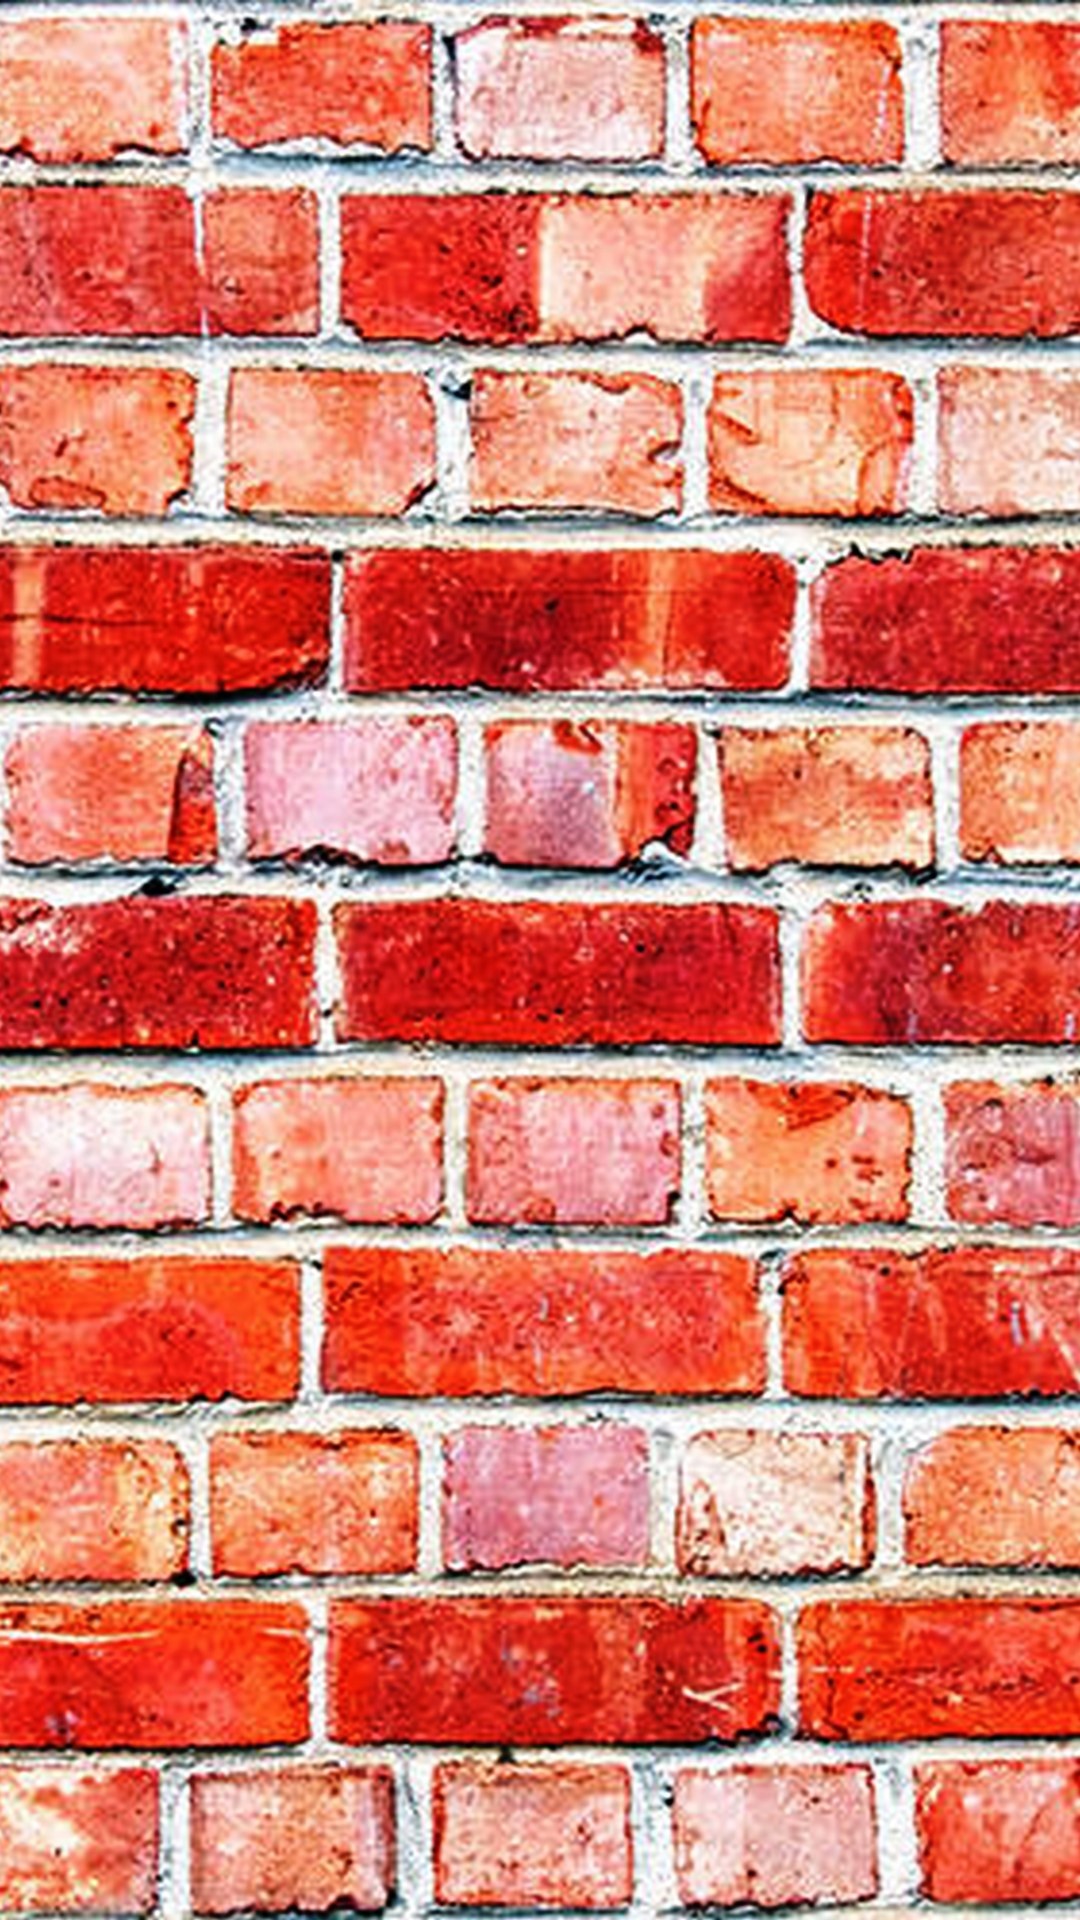 Brick Backgrounds For Android With high-resolution 1080X1920 pixel. You can use this wallpaper for your Android backgrounds, Tablet, Samsung Screensavers, Mobile Phone Lock Screen and another Smartphones device